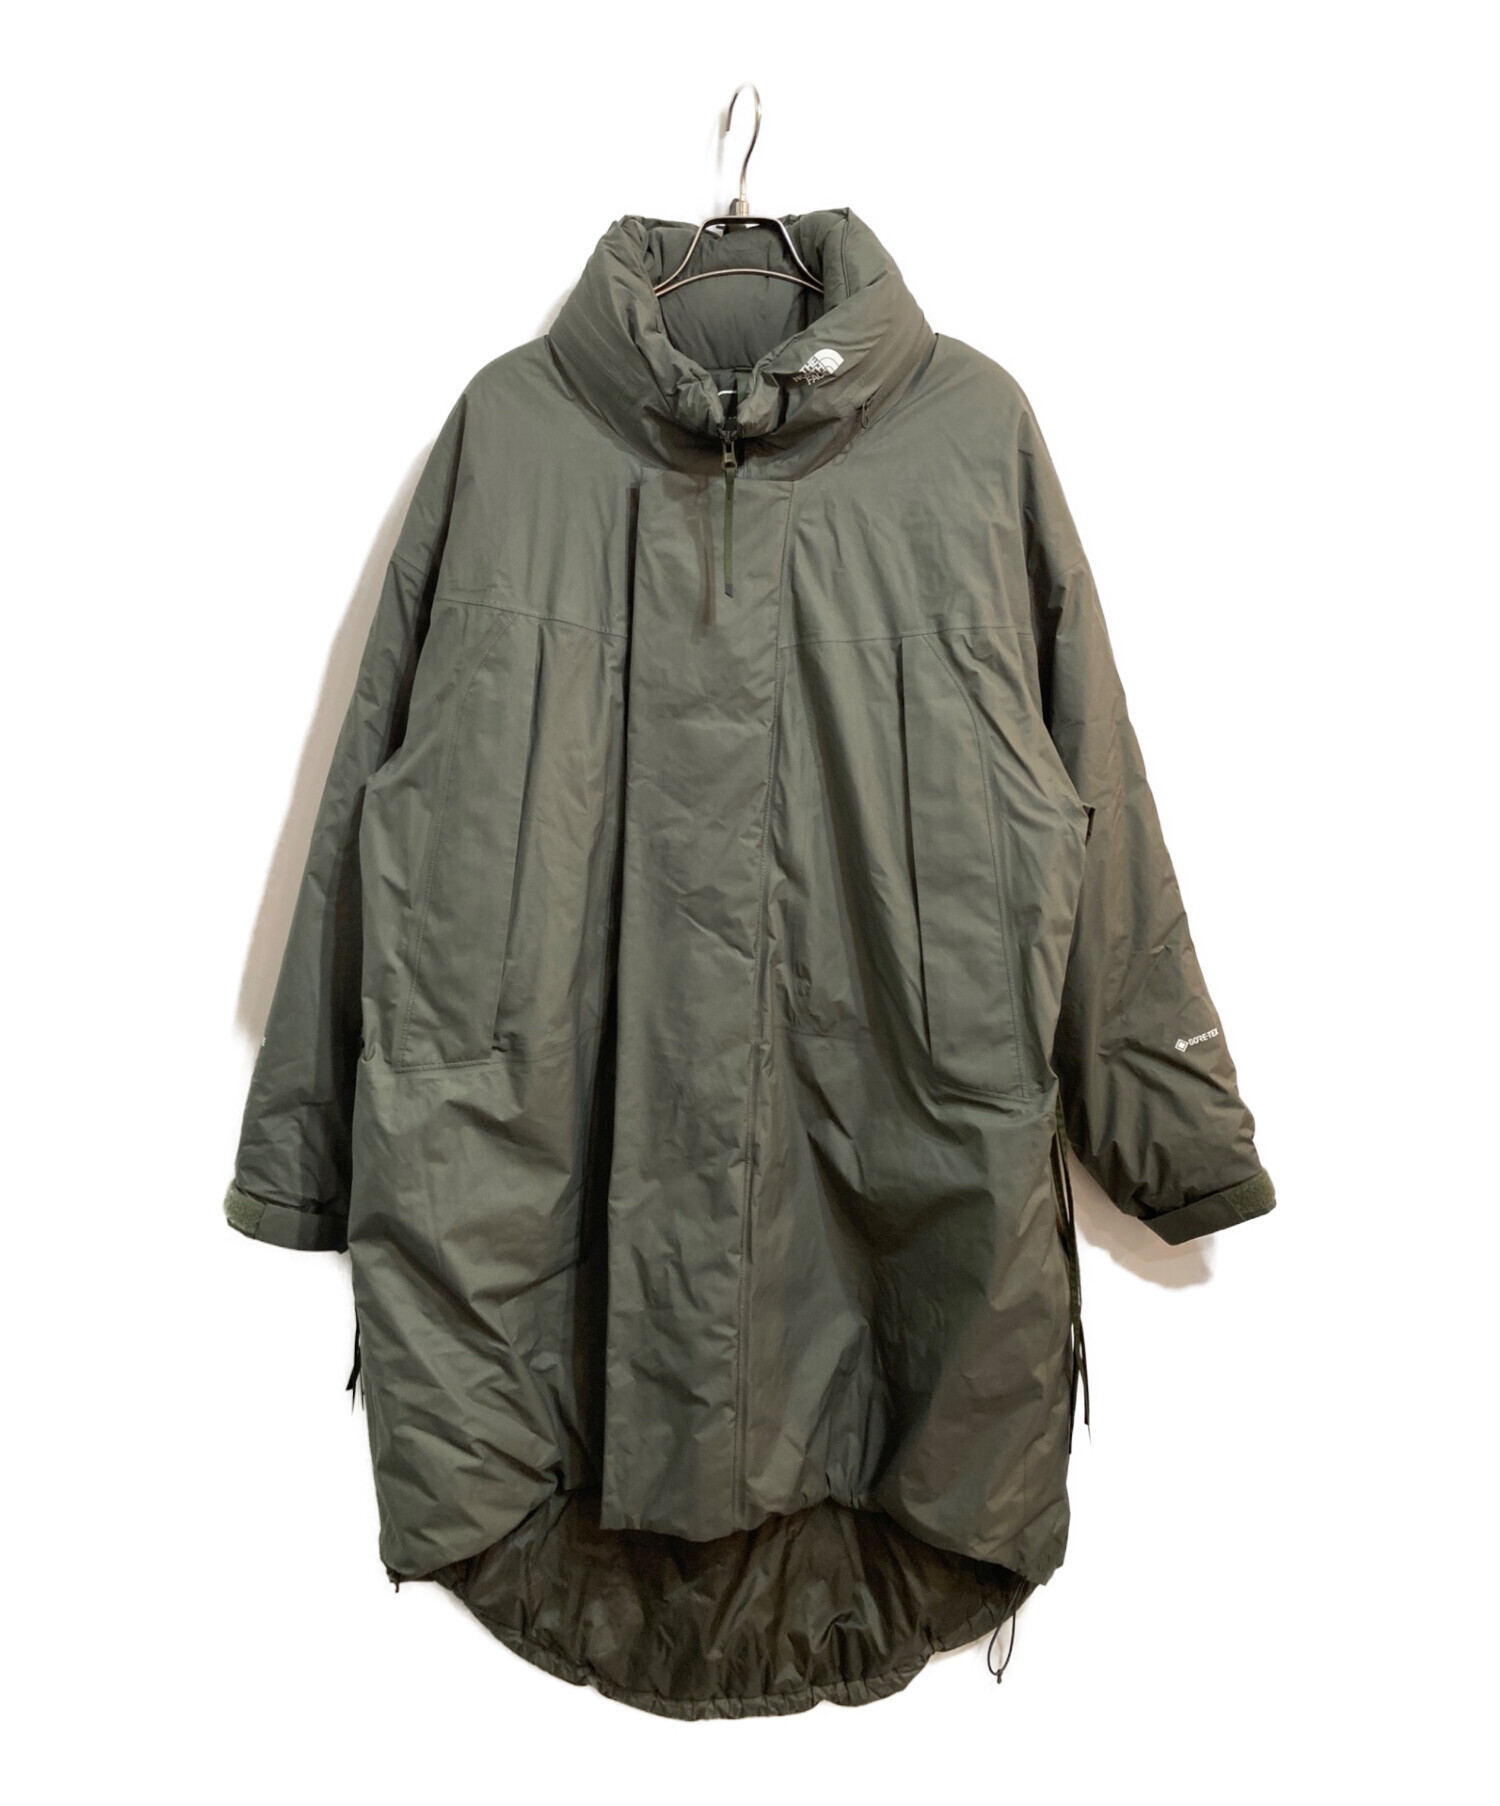 THE NORTH FACE×HYKE メンズS monster parka